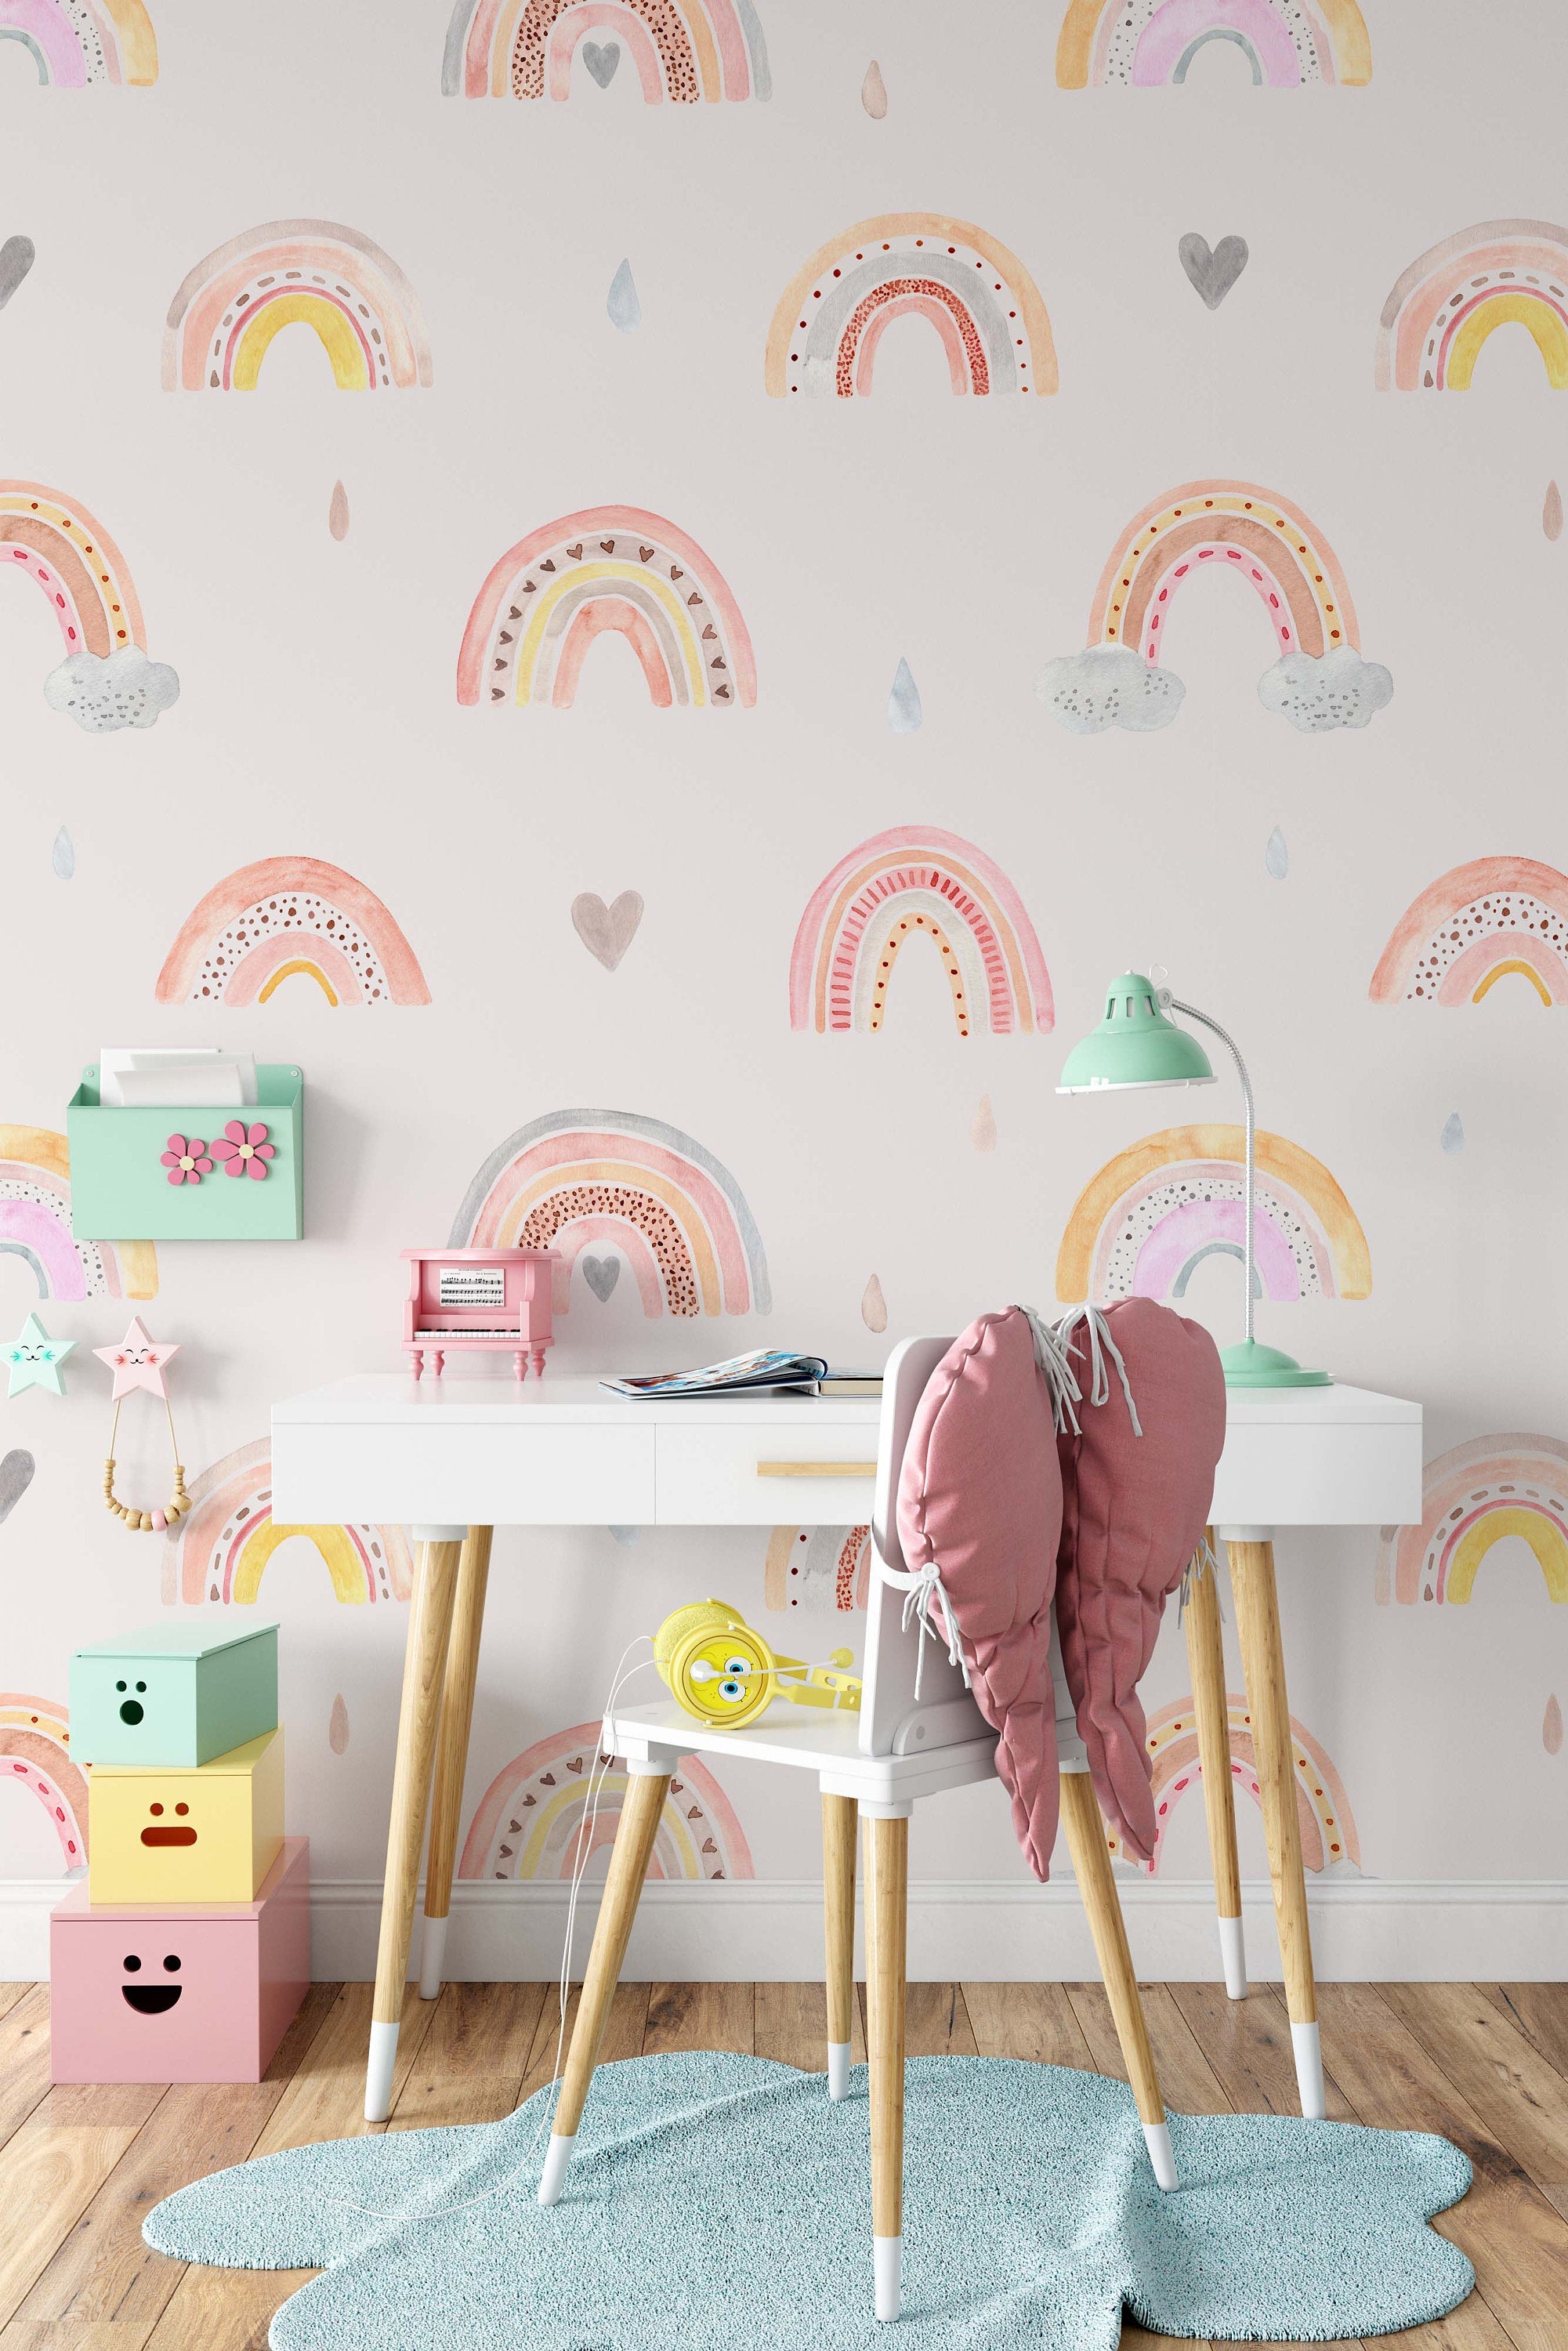 Watercolor Rainbow Rain Clouds Hearts on The Pink Background Wallpaper Animal Bedroom Children Kids Room Mural Home Decor Wall Art Removable